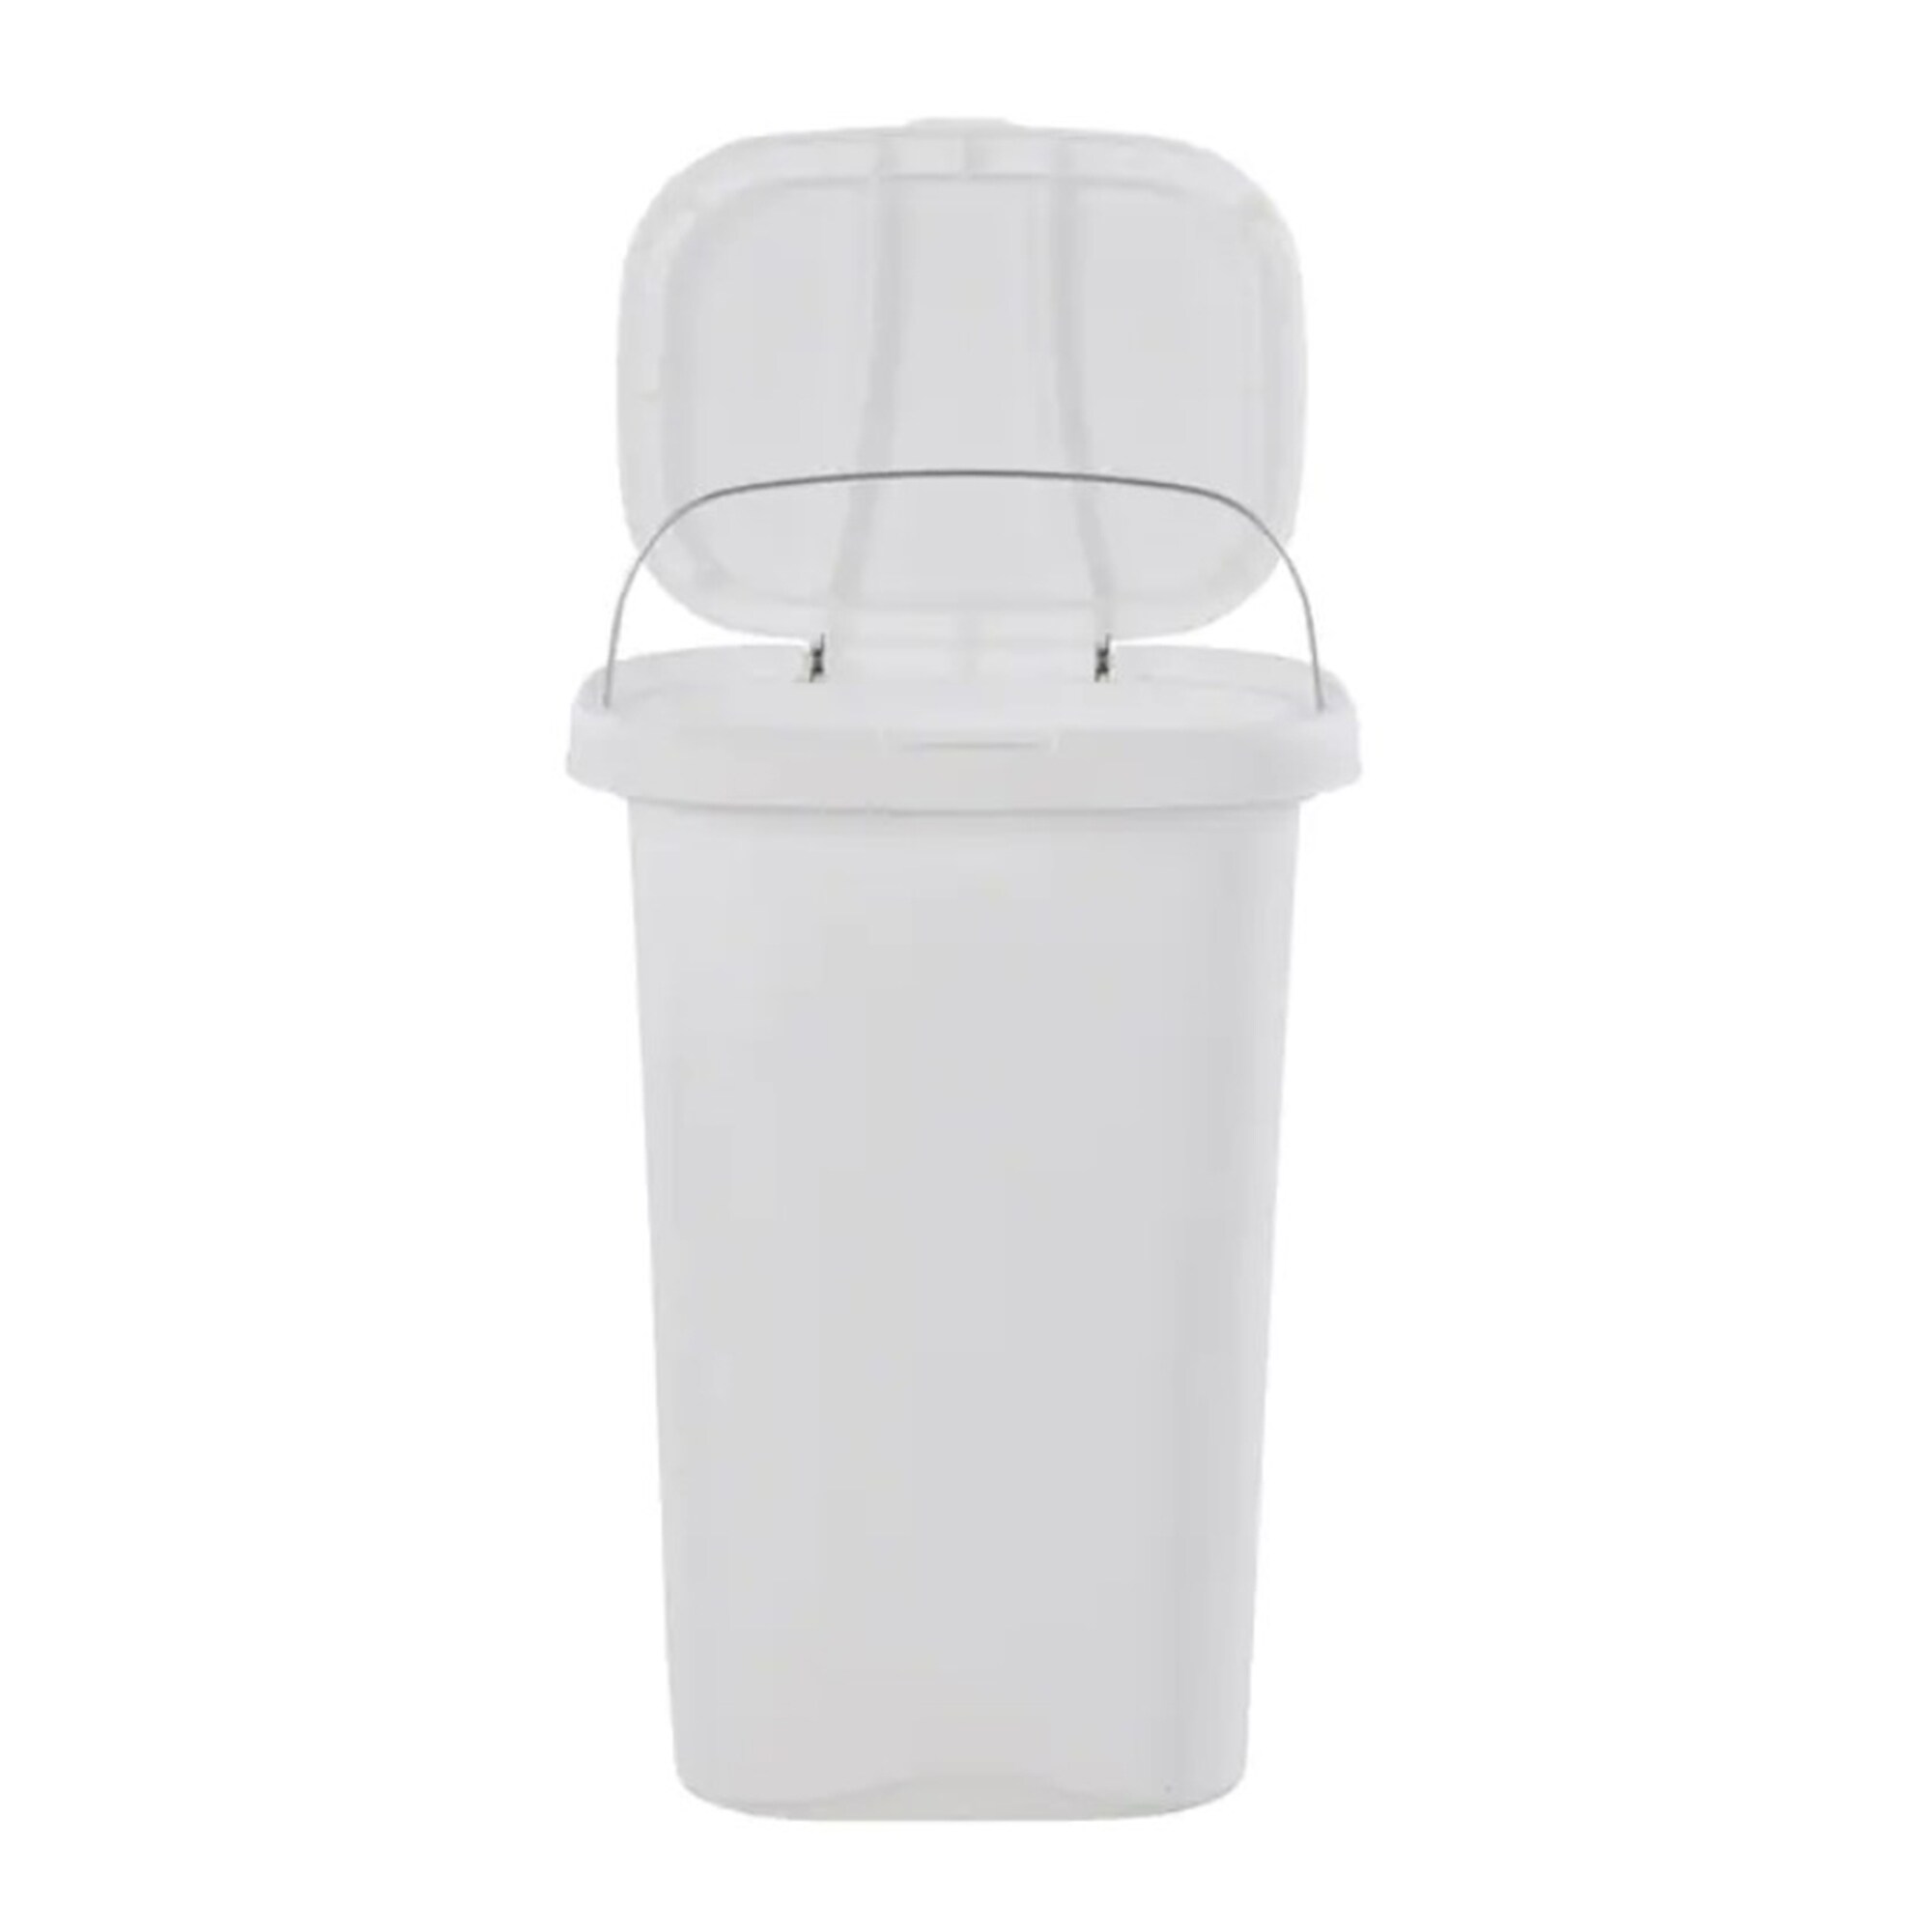 https://ak1.ostkcdn.com/images/products/is/images/direct/5285be97b9c21bfdaed5ea7ec144cd2a8f807f4f/Rubbermaid-13-Gallon-Rectangular-Spring-Top-Lid-Wastebasket-Trash-Can%2C-White.jpg